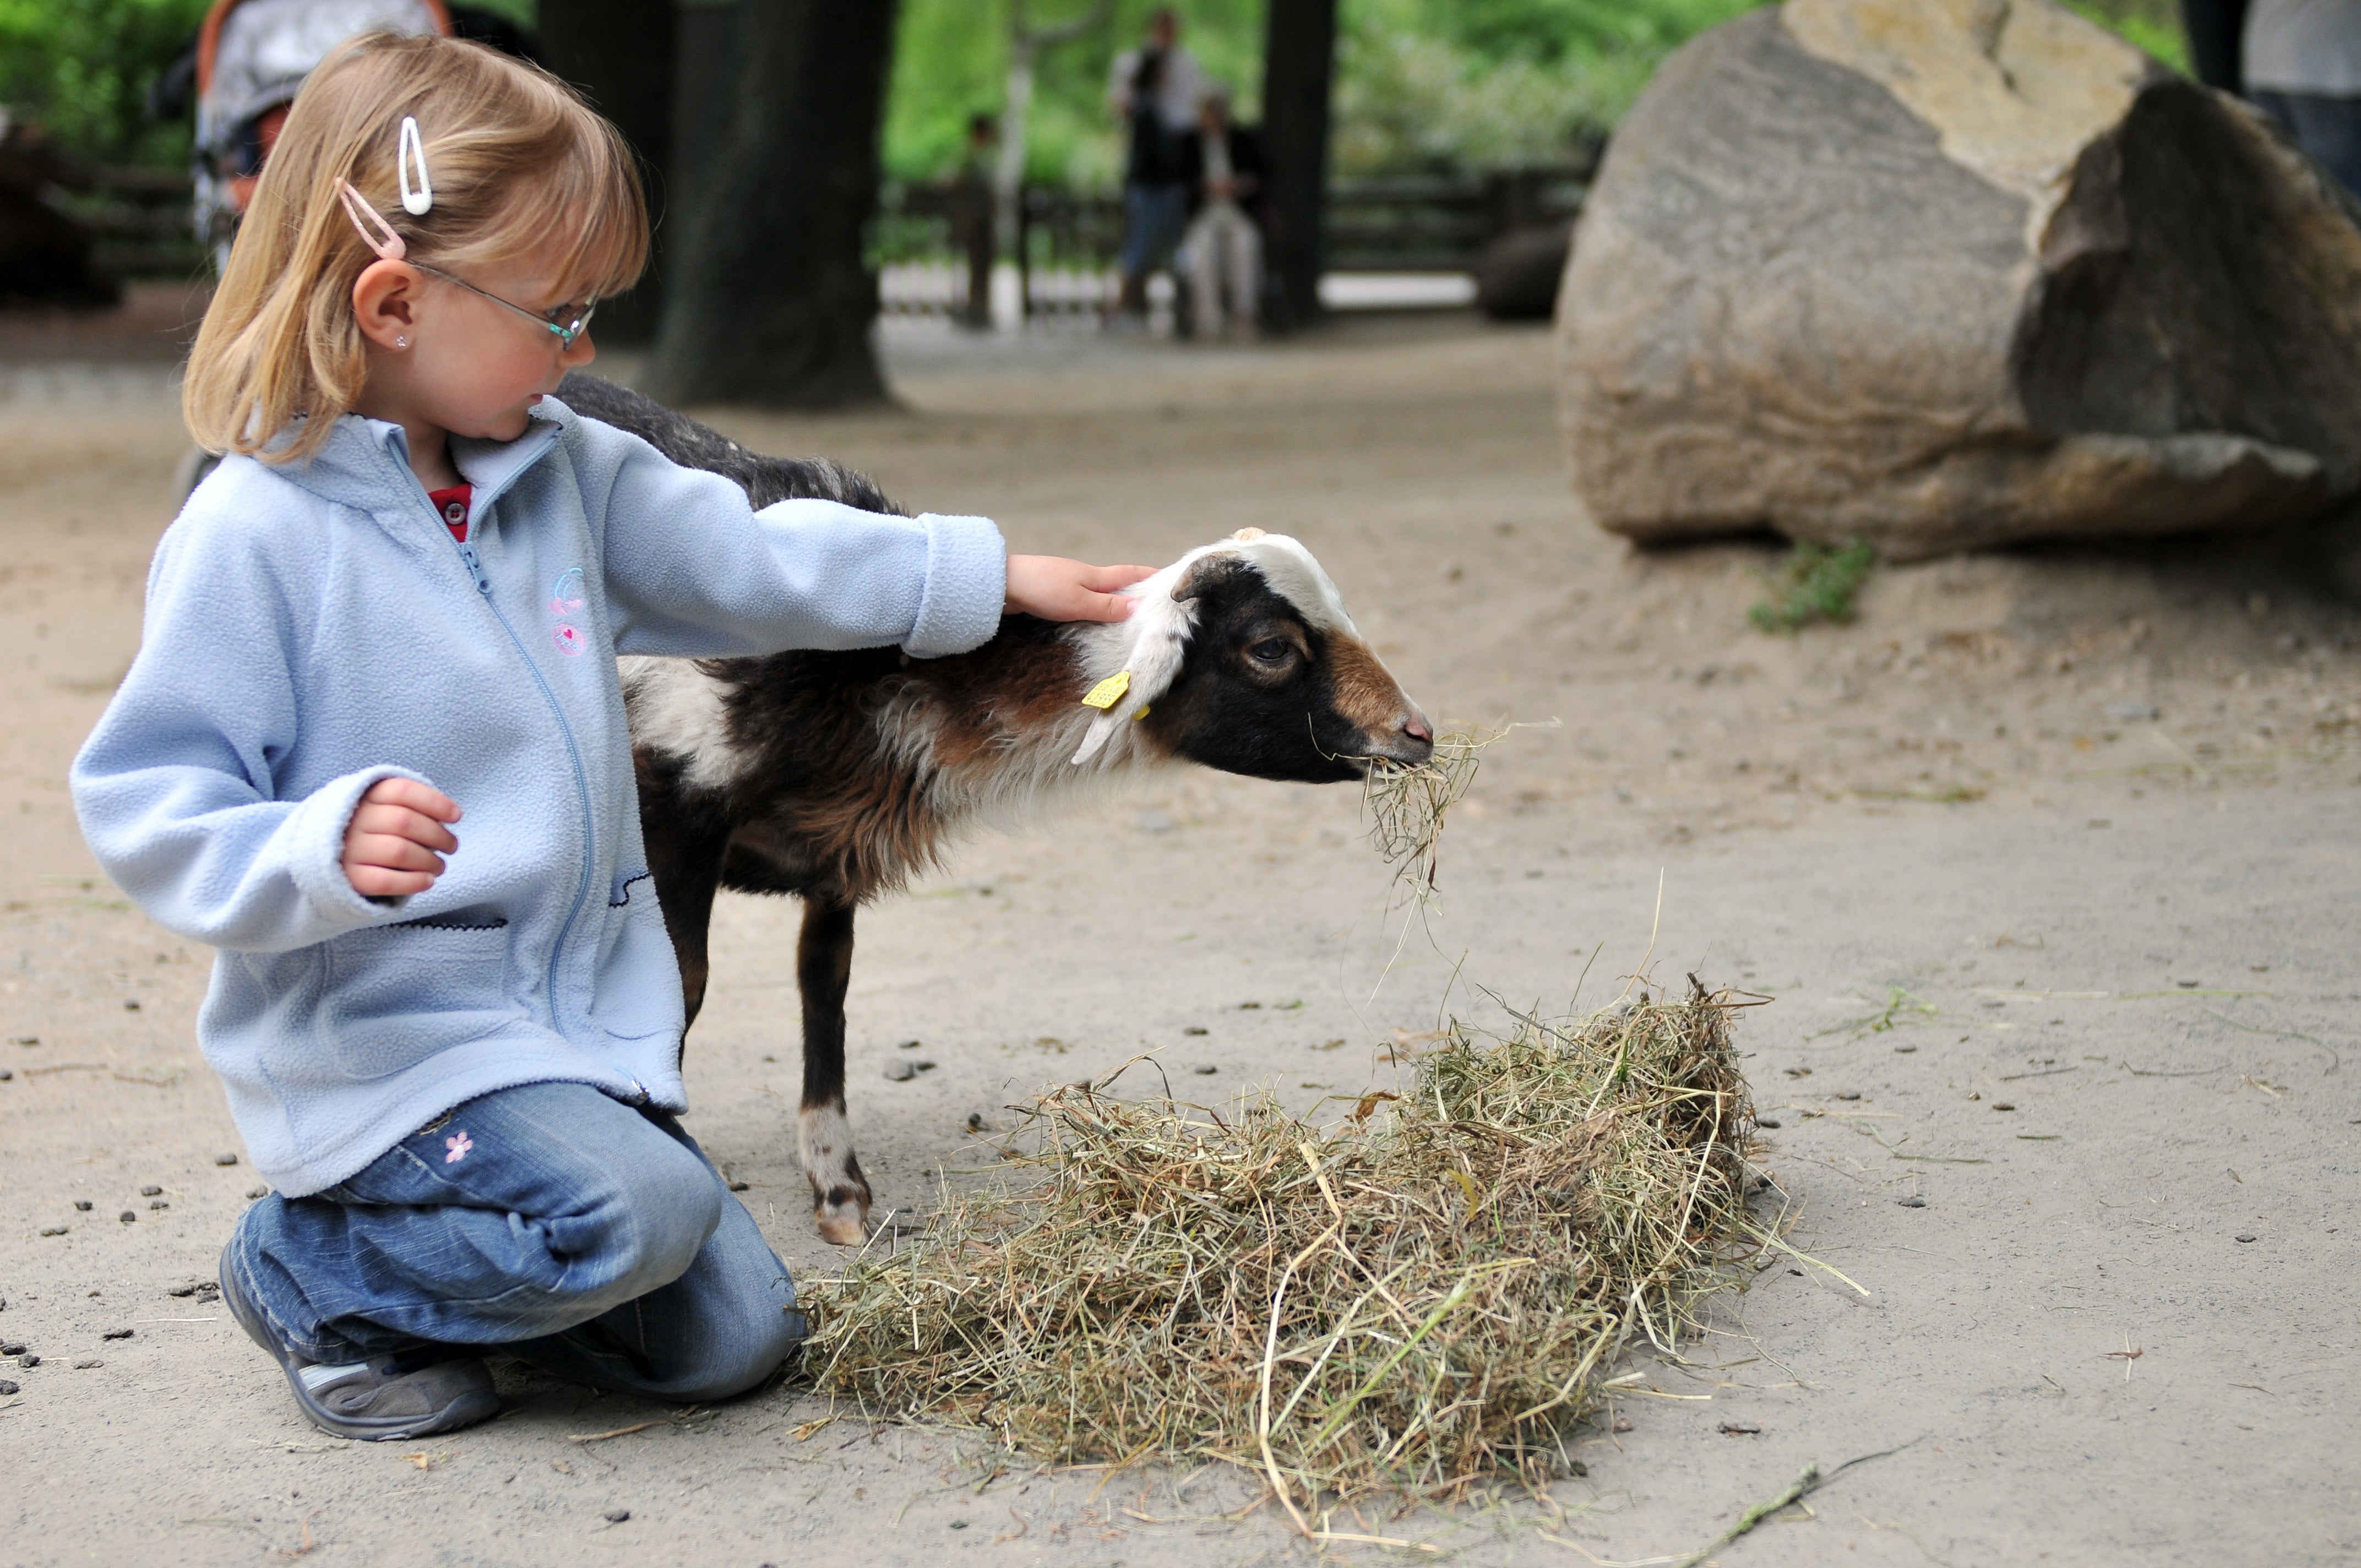 Little girl petting a baby goat that's eating hay